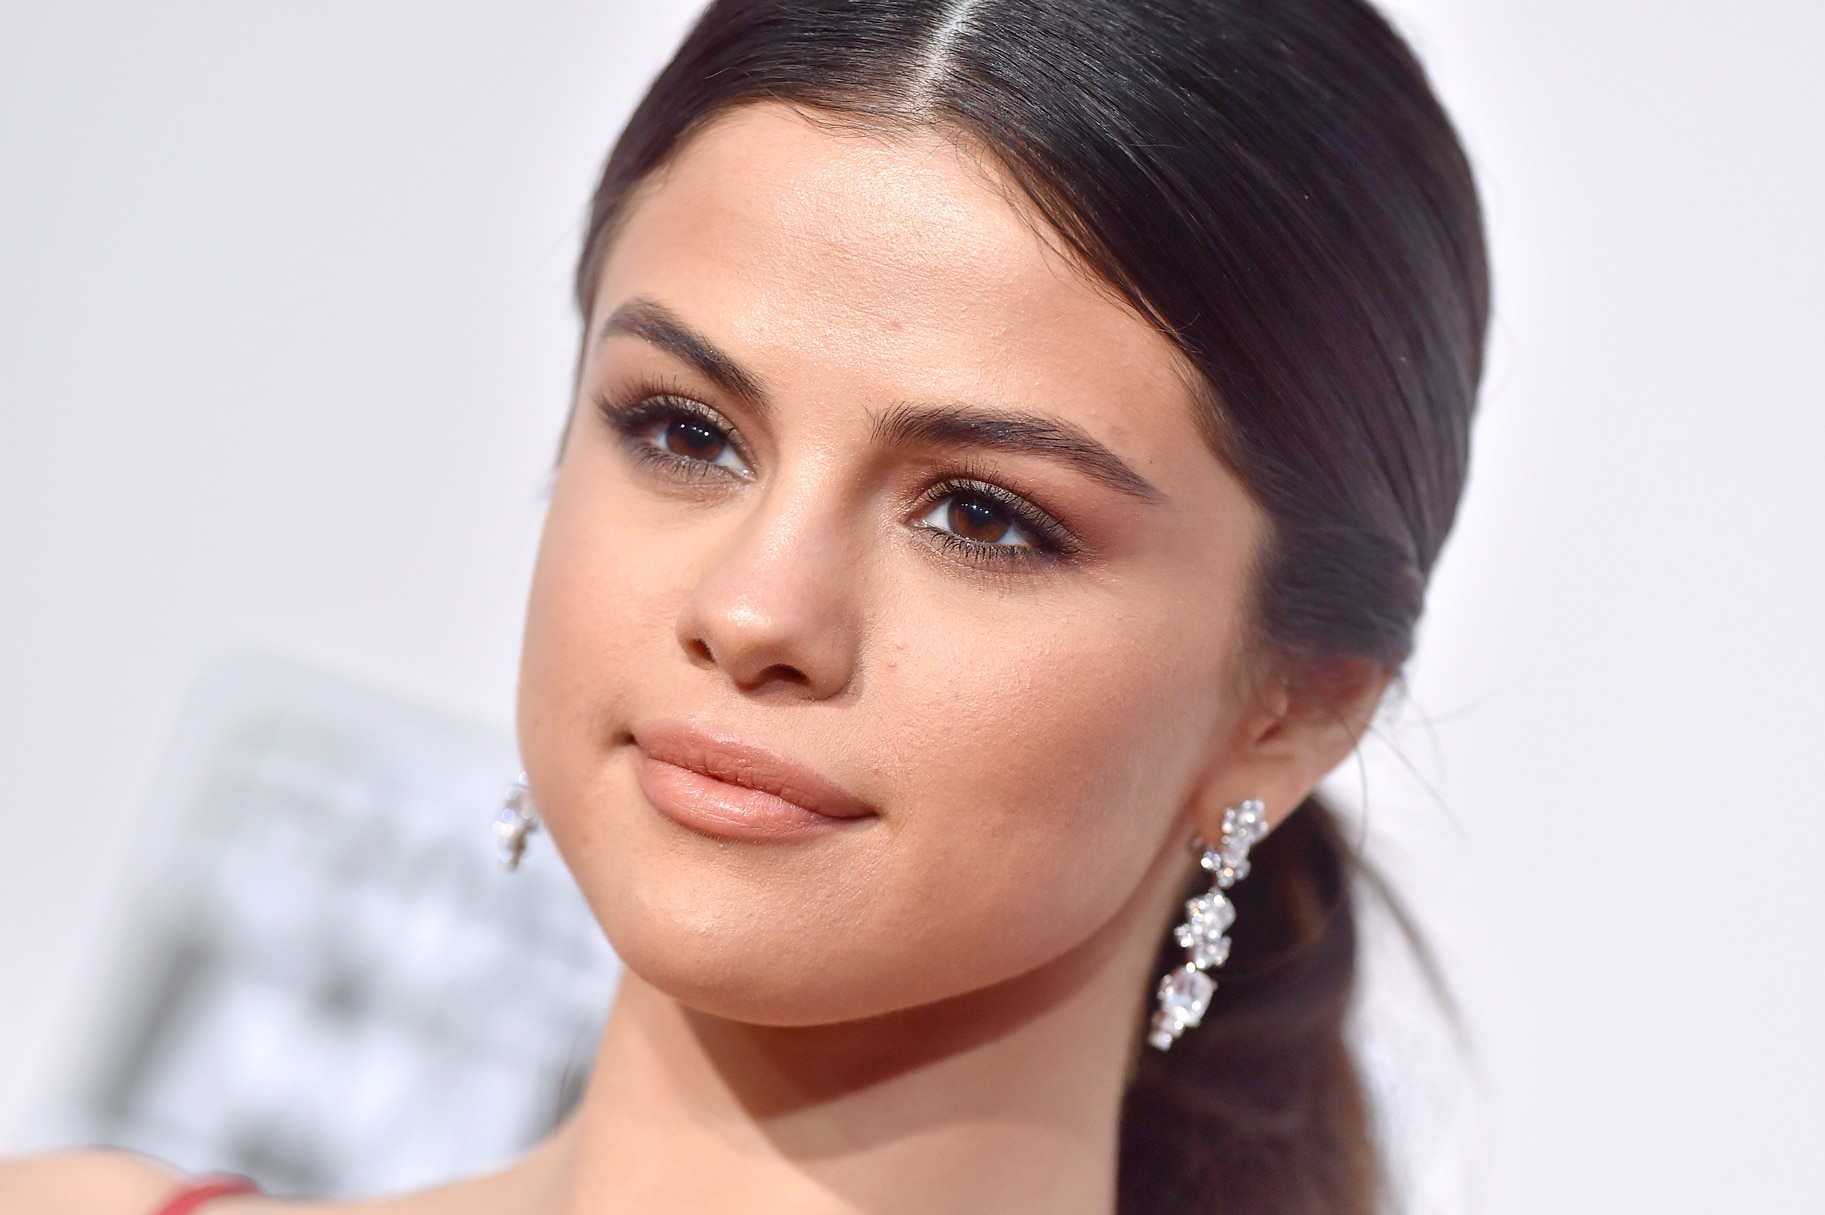 Selena Gomez Unveils Curly Hairstyle As She Promotes New Makeup Line Rare  Beauty  Celebrity Insider